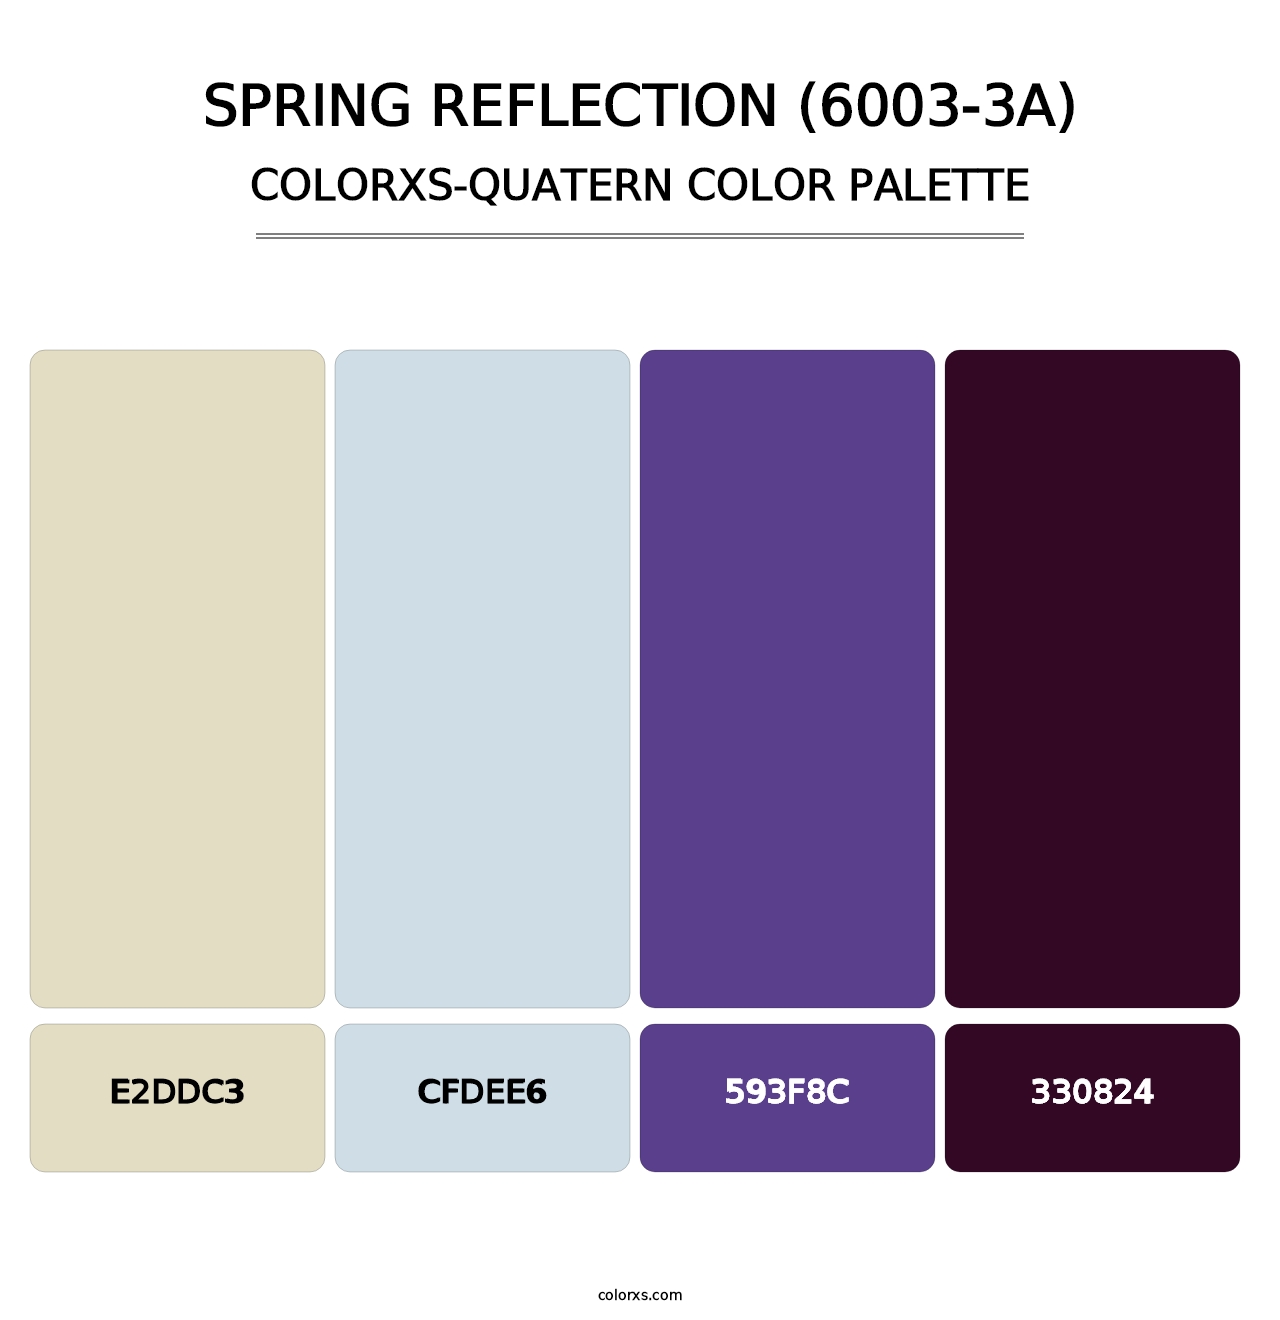 Spring Reflection (6003-3A) - Colorxs Quatern Palette